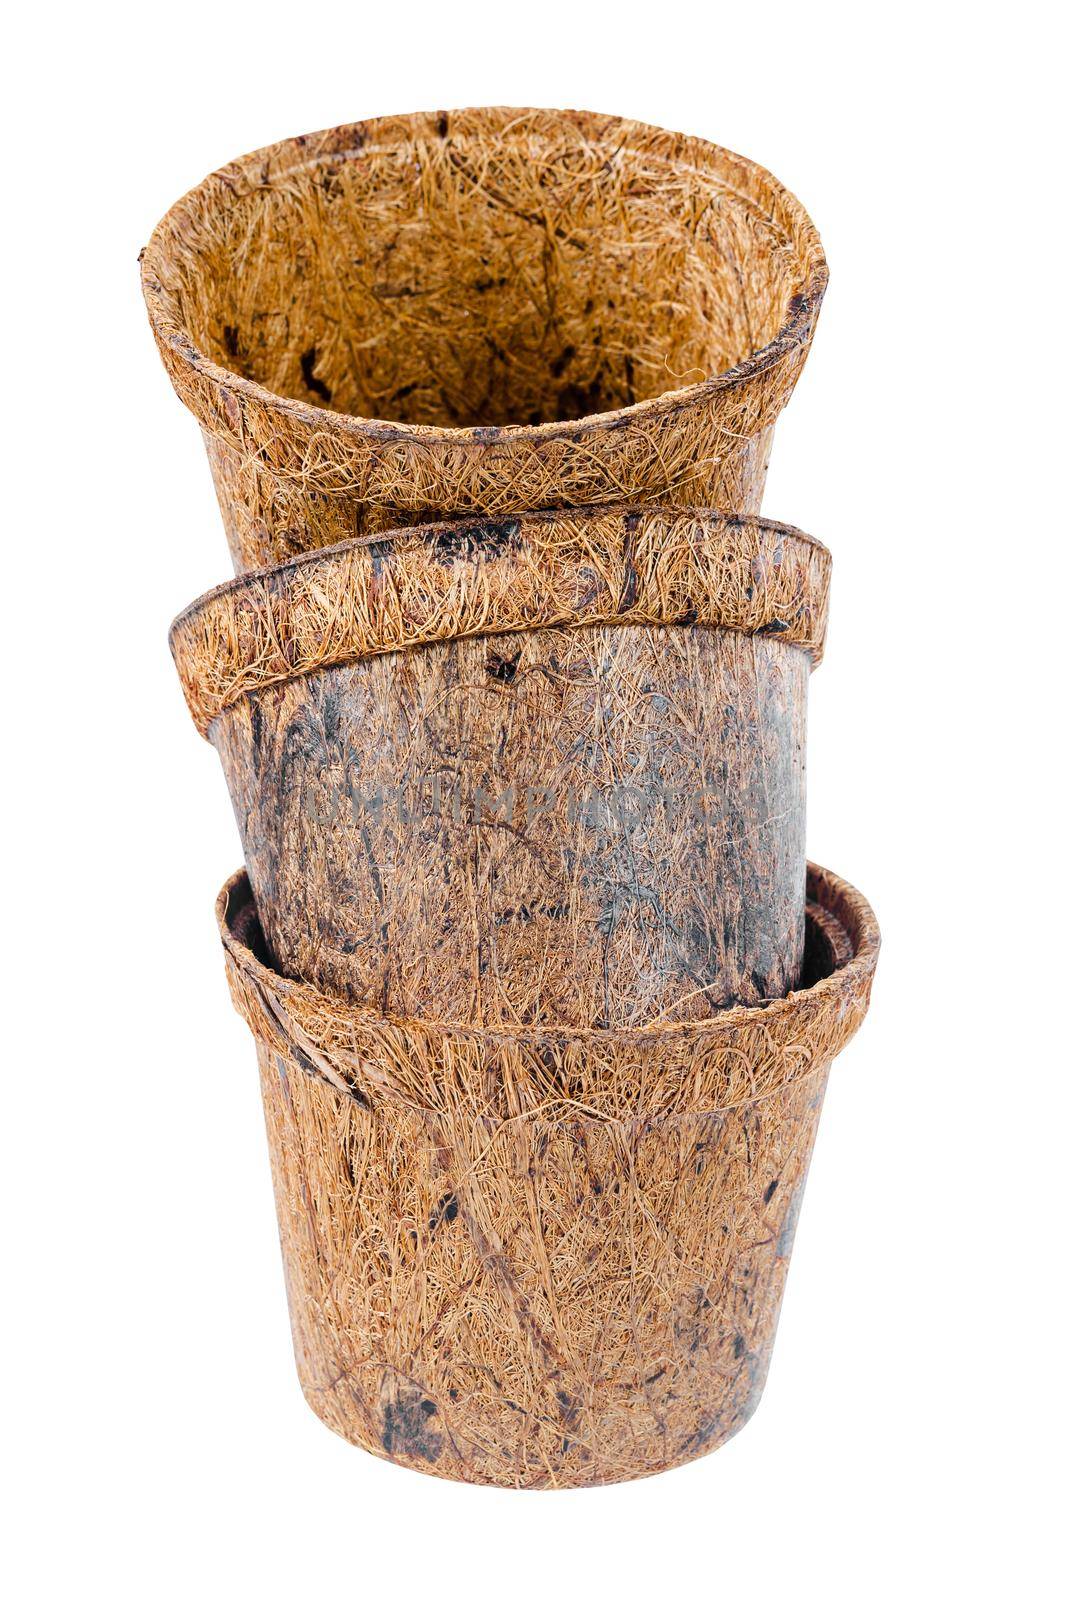 Flower pot, Coconut fiber plant isolated on a white background clipping path. Reduce global warming. Organic.